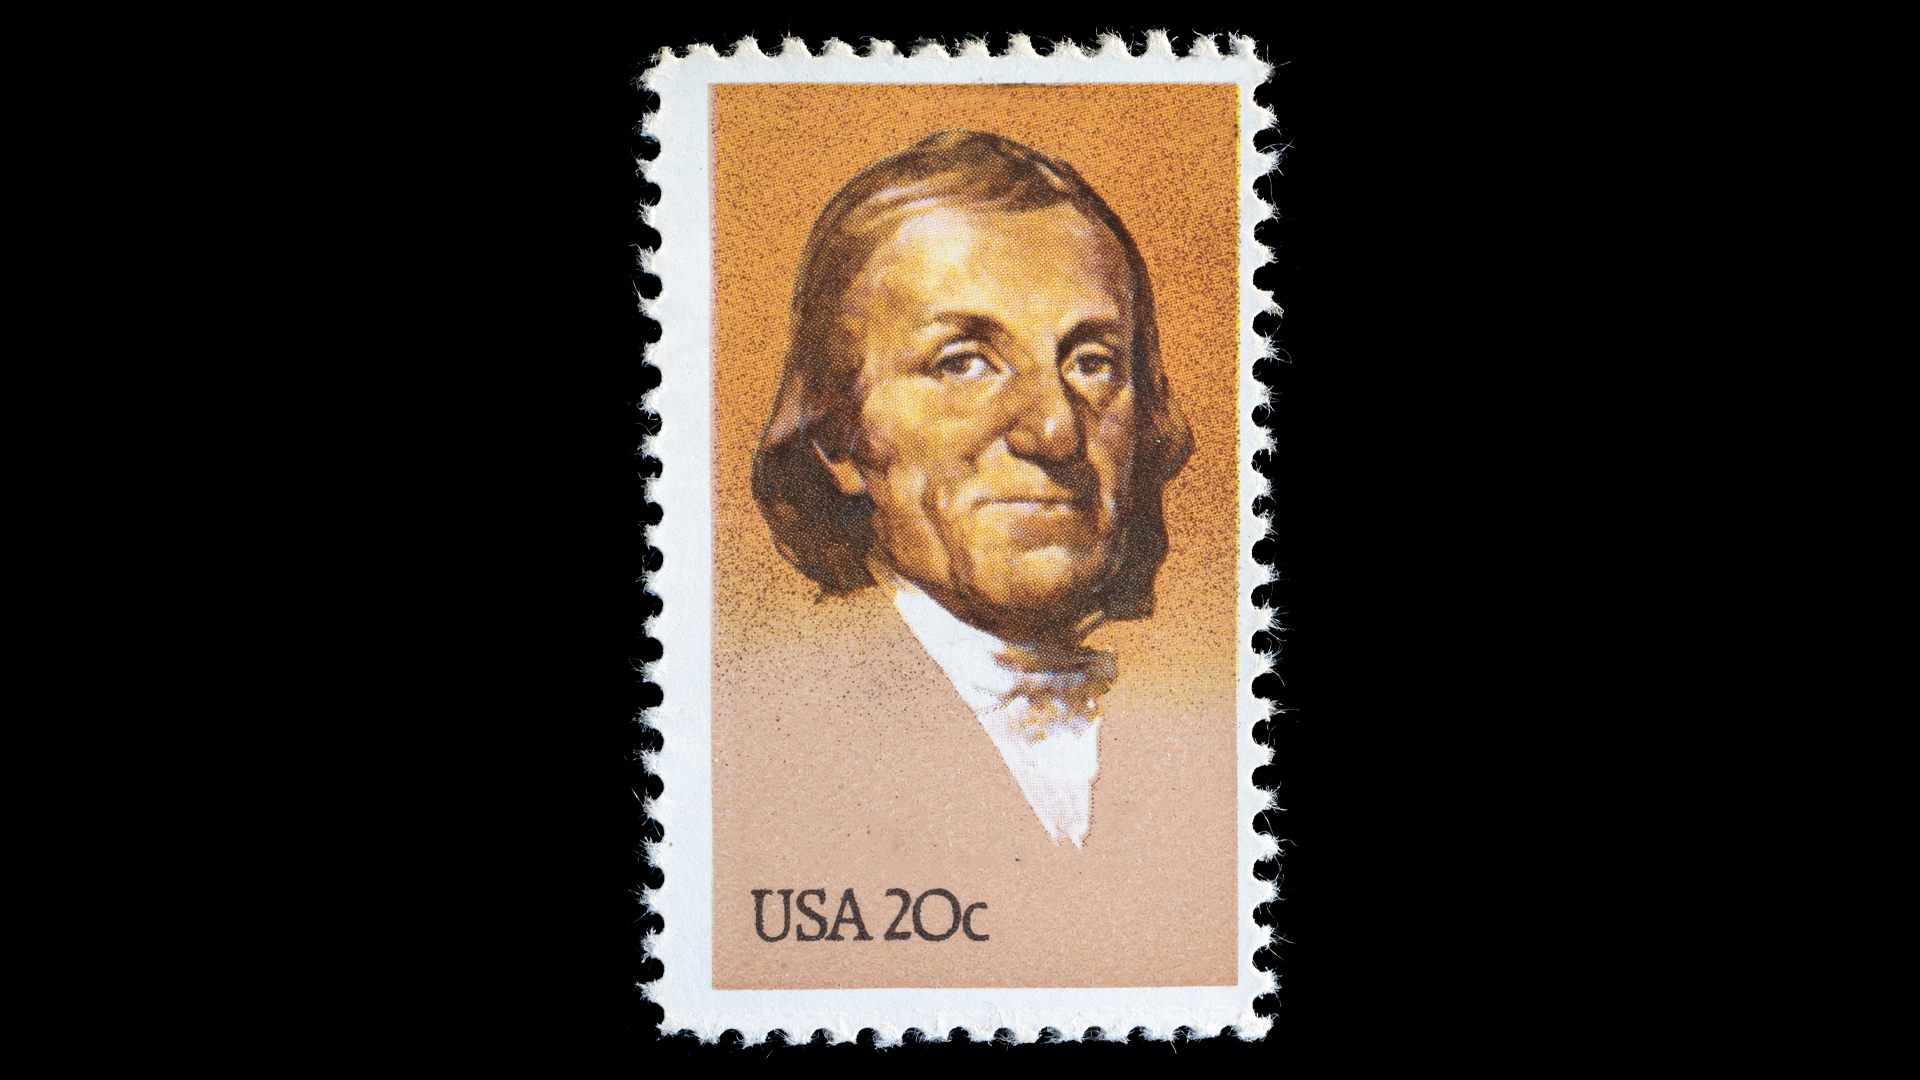 A scientist on a stamp